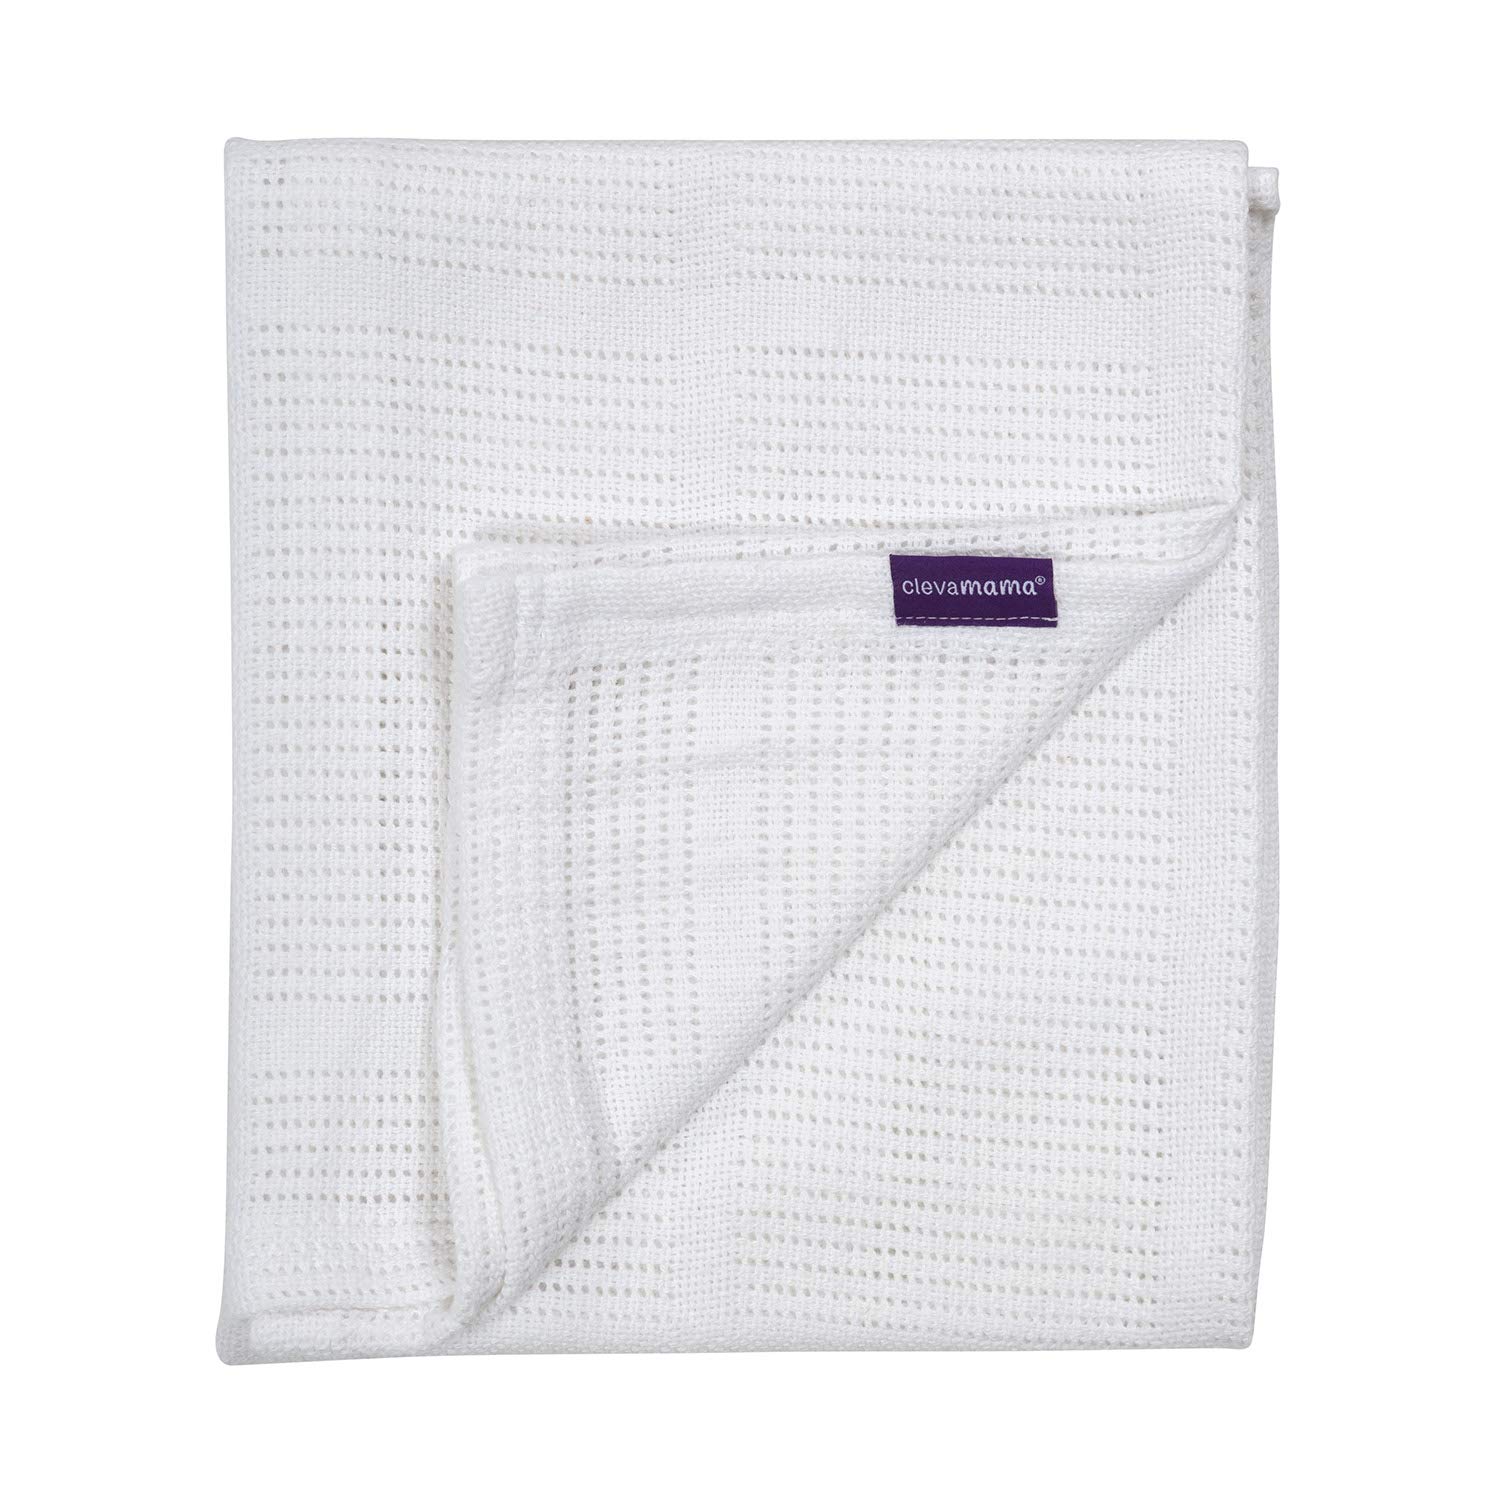 Clevamama Baby Blanket with Breathable Cellular Structure for Baby Cradle, Breathable Honeycomb Structure, 120 x 140 cm, Cotton, White